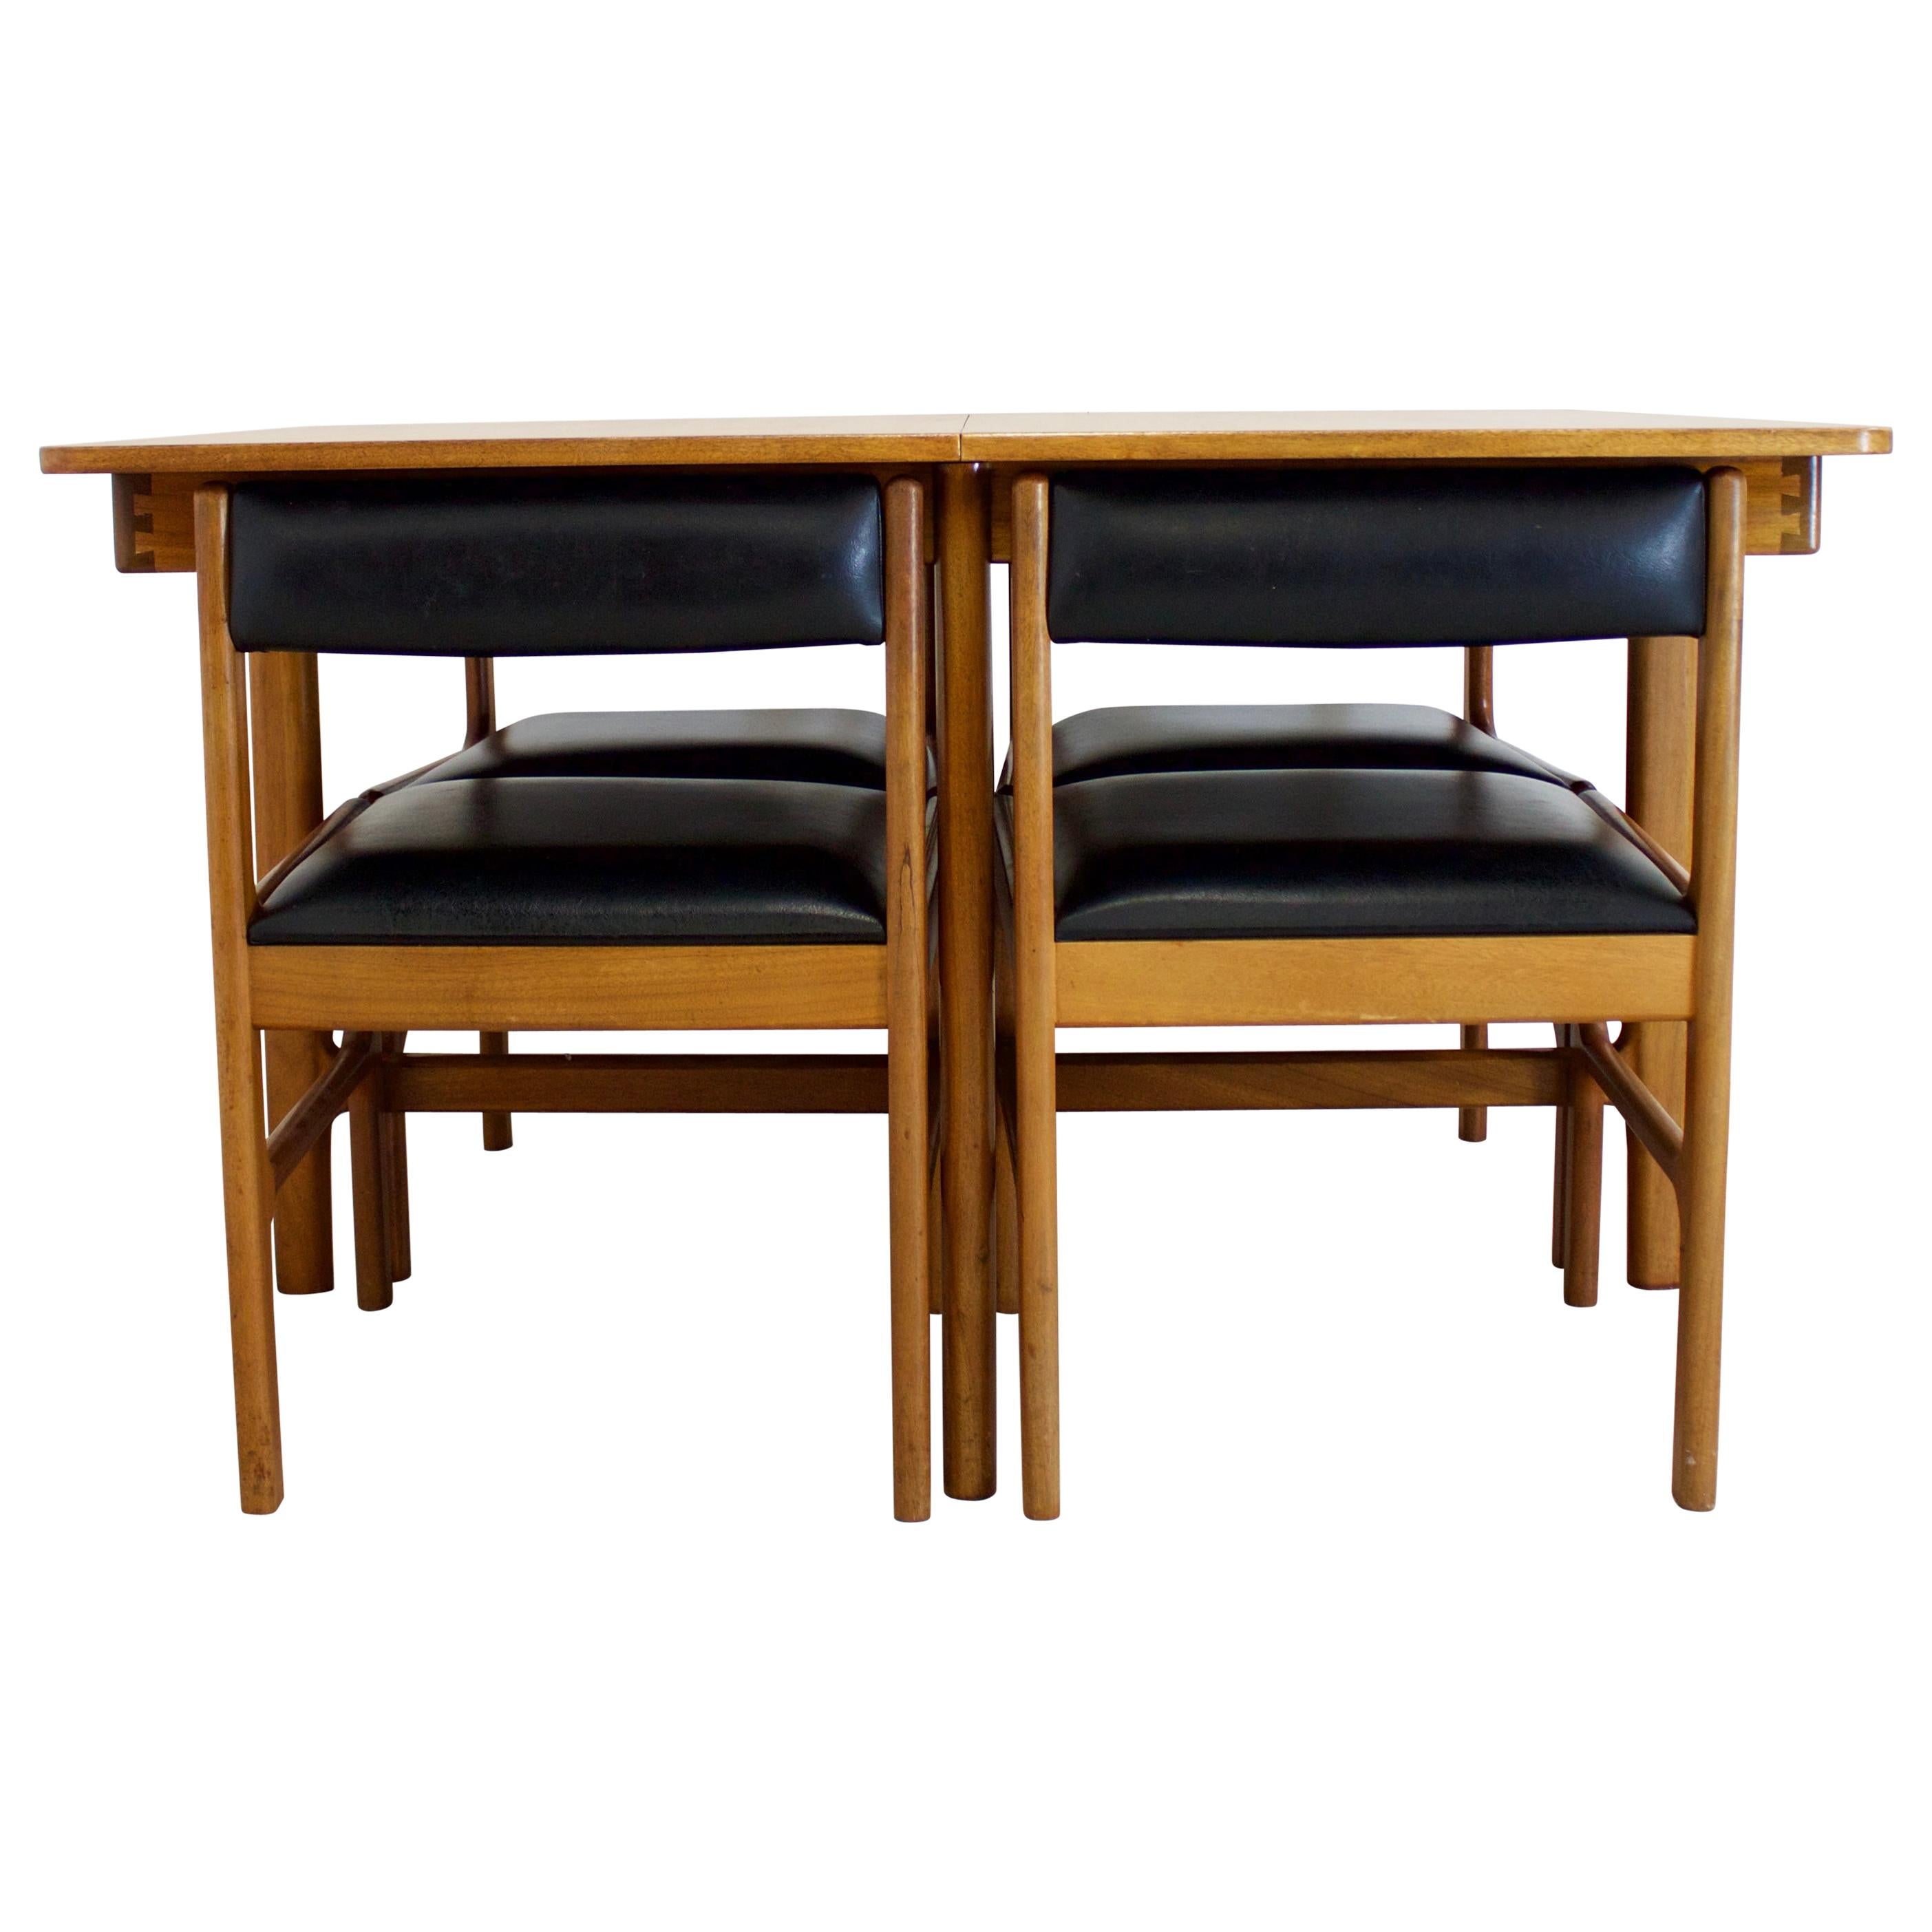 Midcentury Teak Extendable Dining Table with 4 Chairs from McIntosh, 1960s